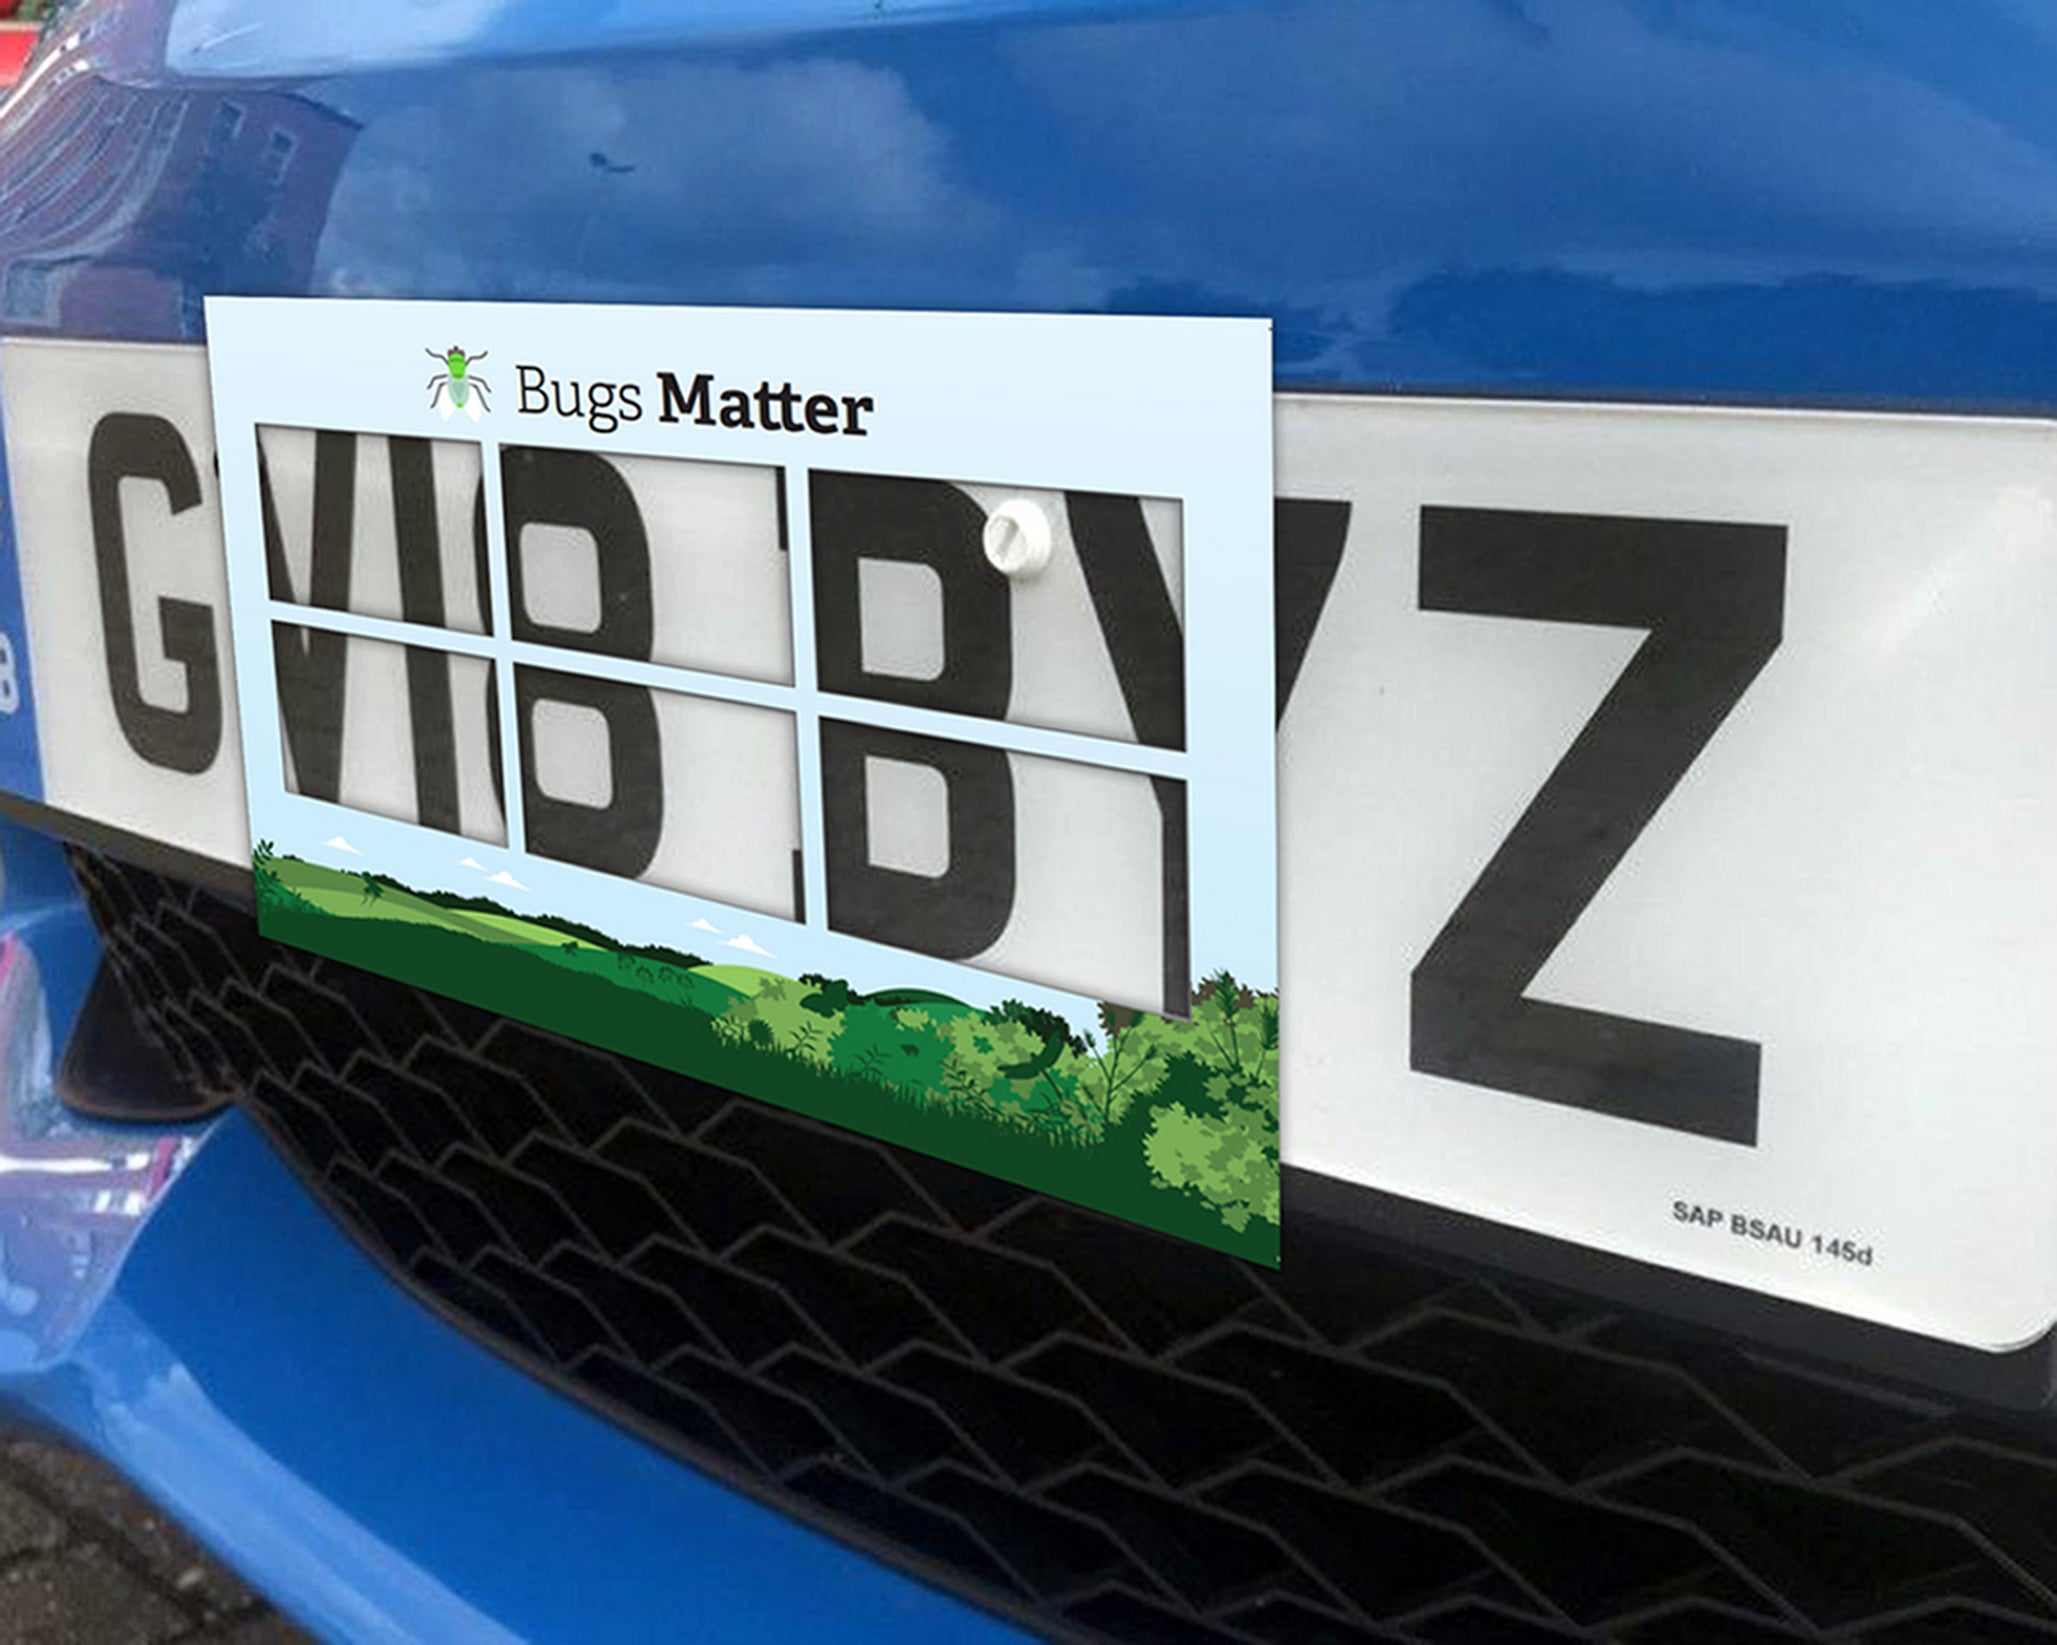 A citizen science project asking people to count squashed bugs on their car number plates